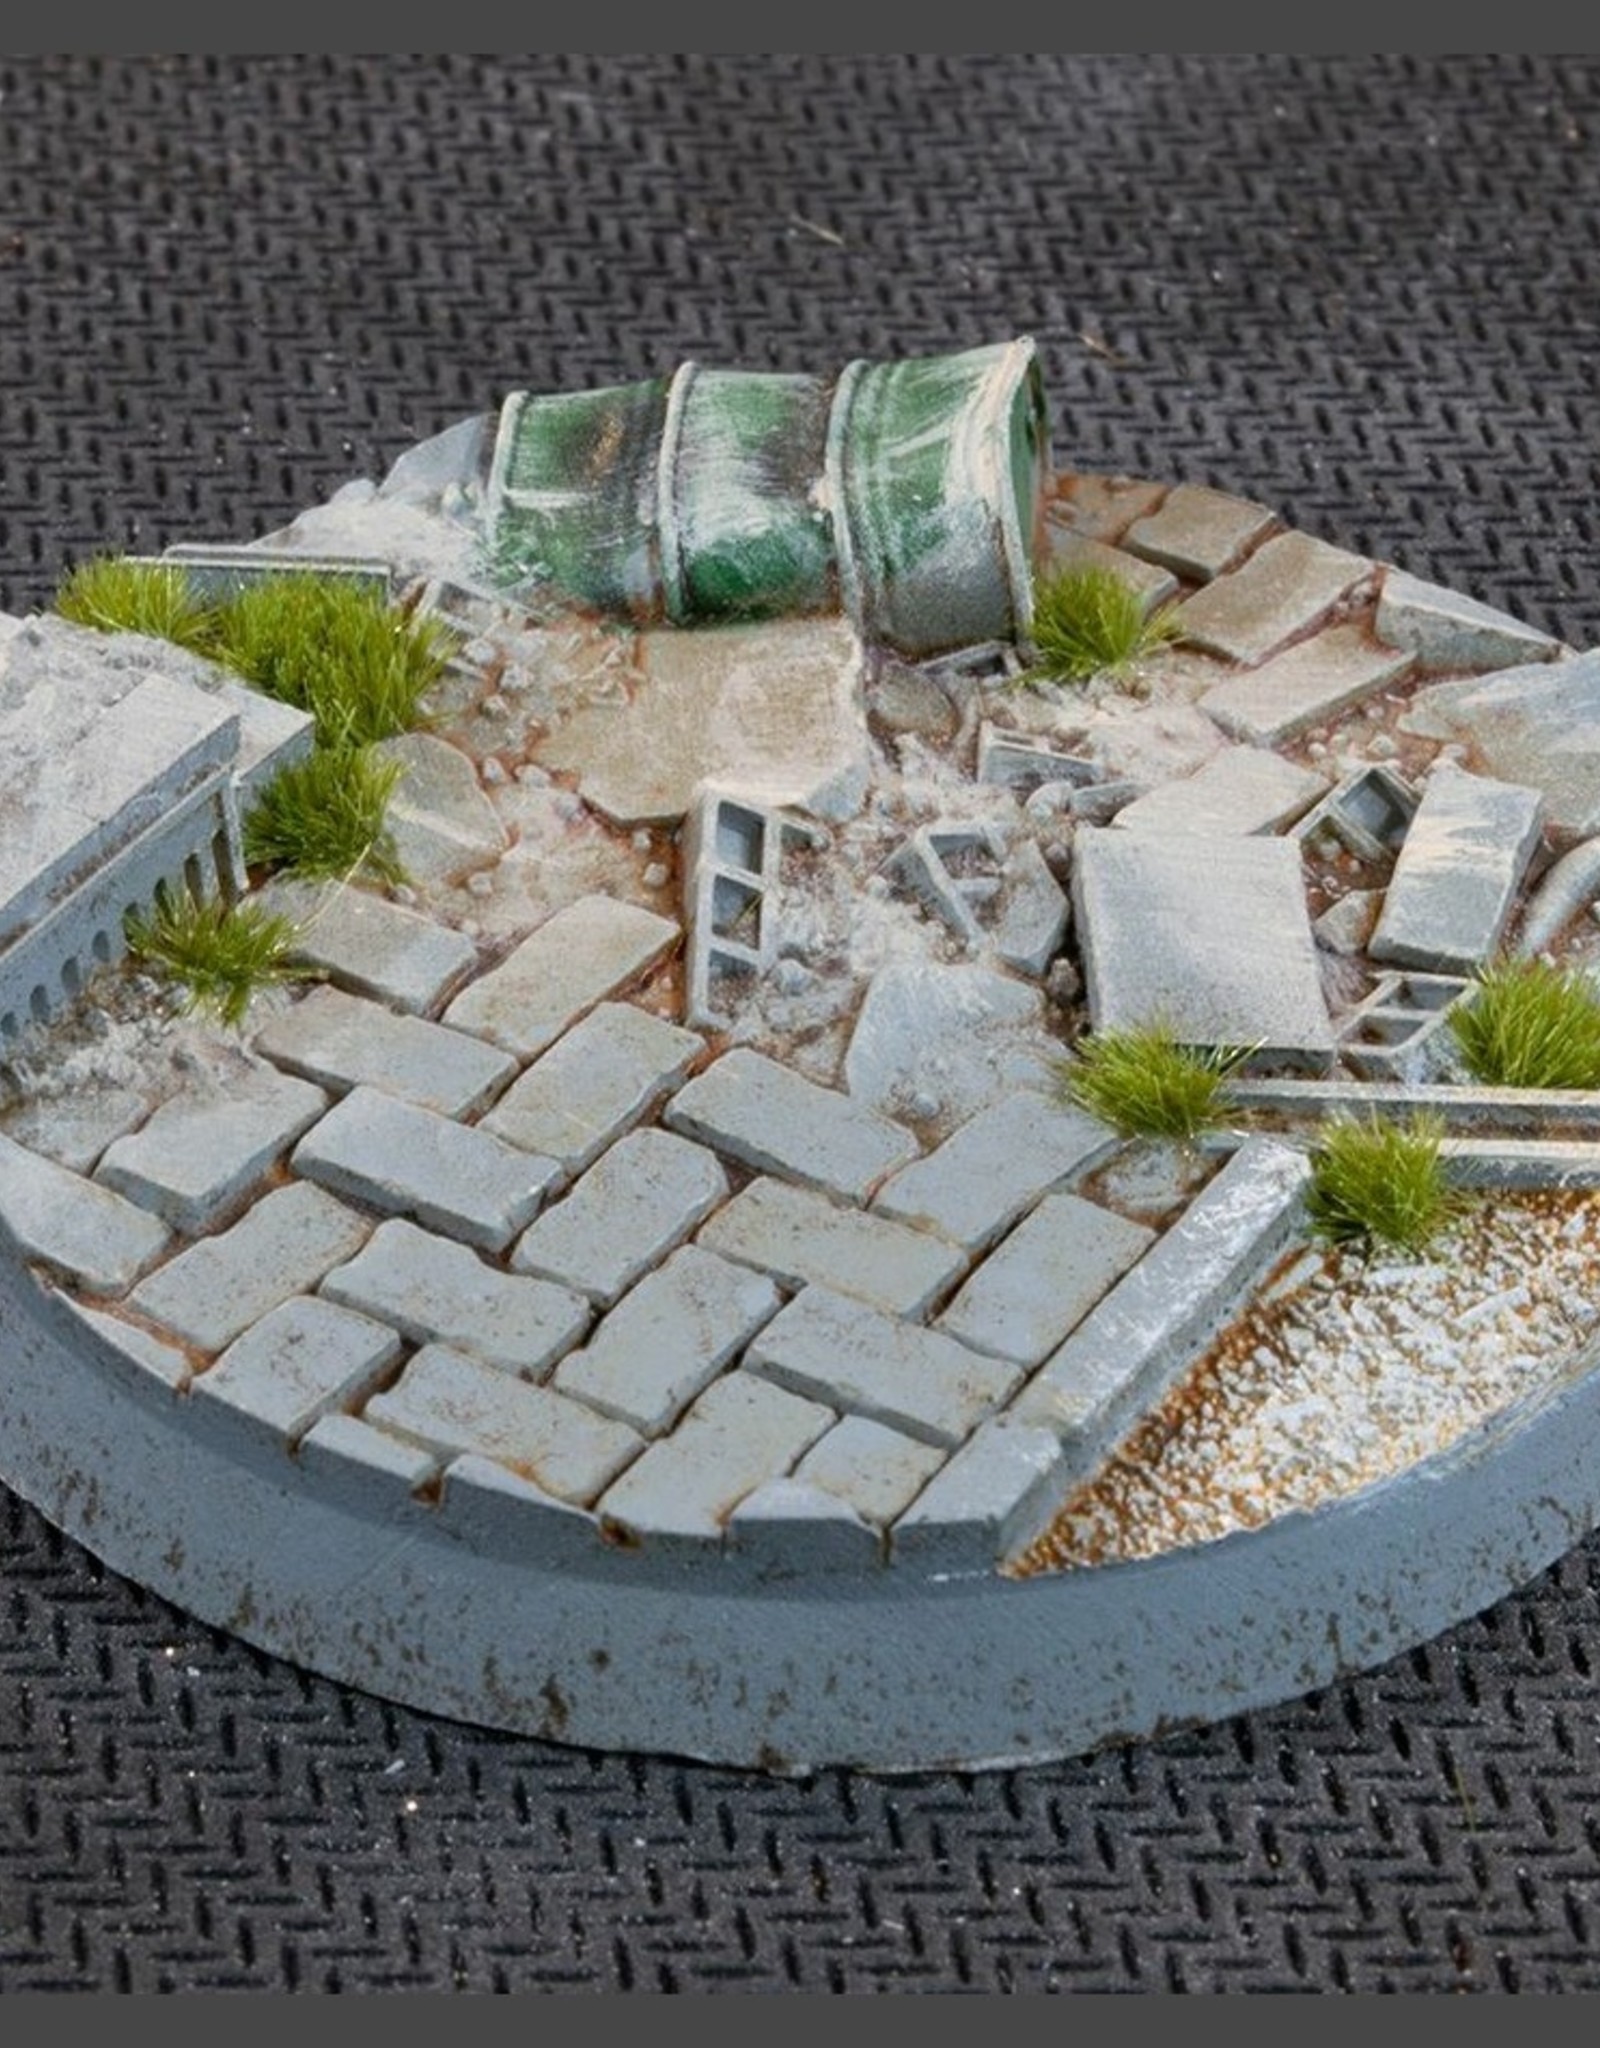 Gamers Grass Urban Warfare Bases Pre-Painted (3x 50mm Round)